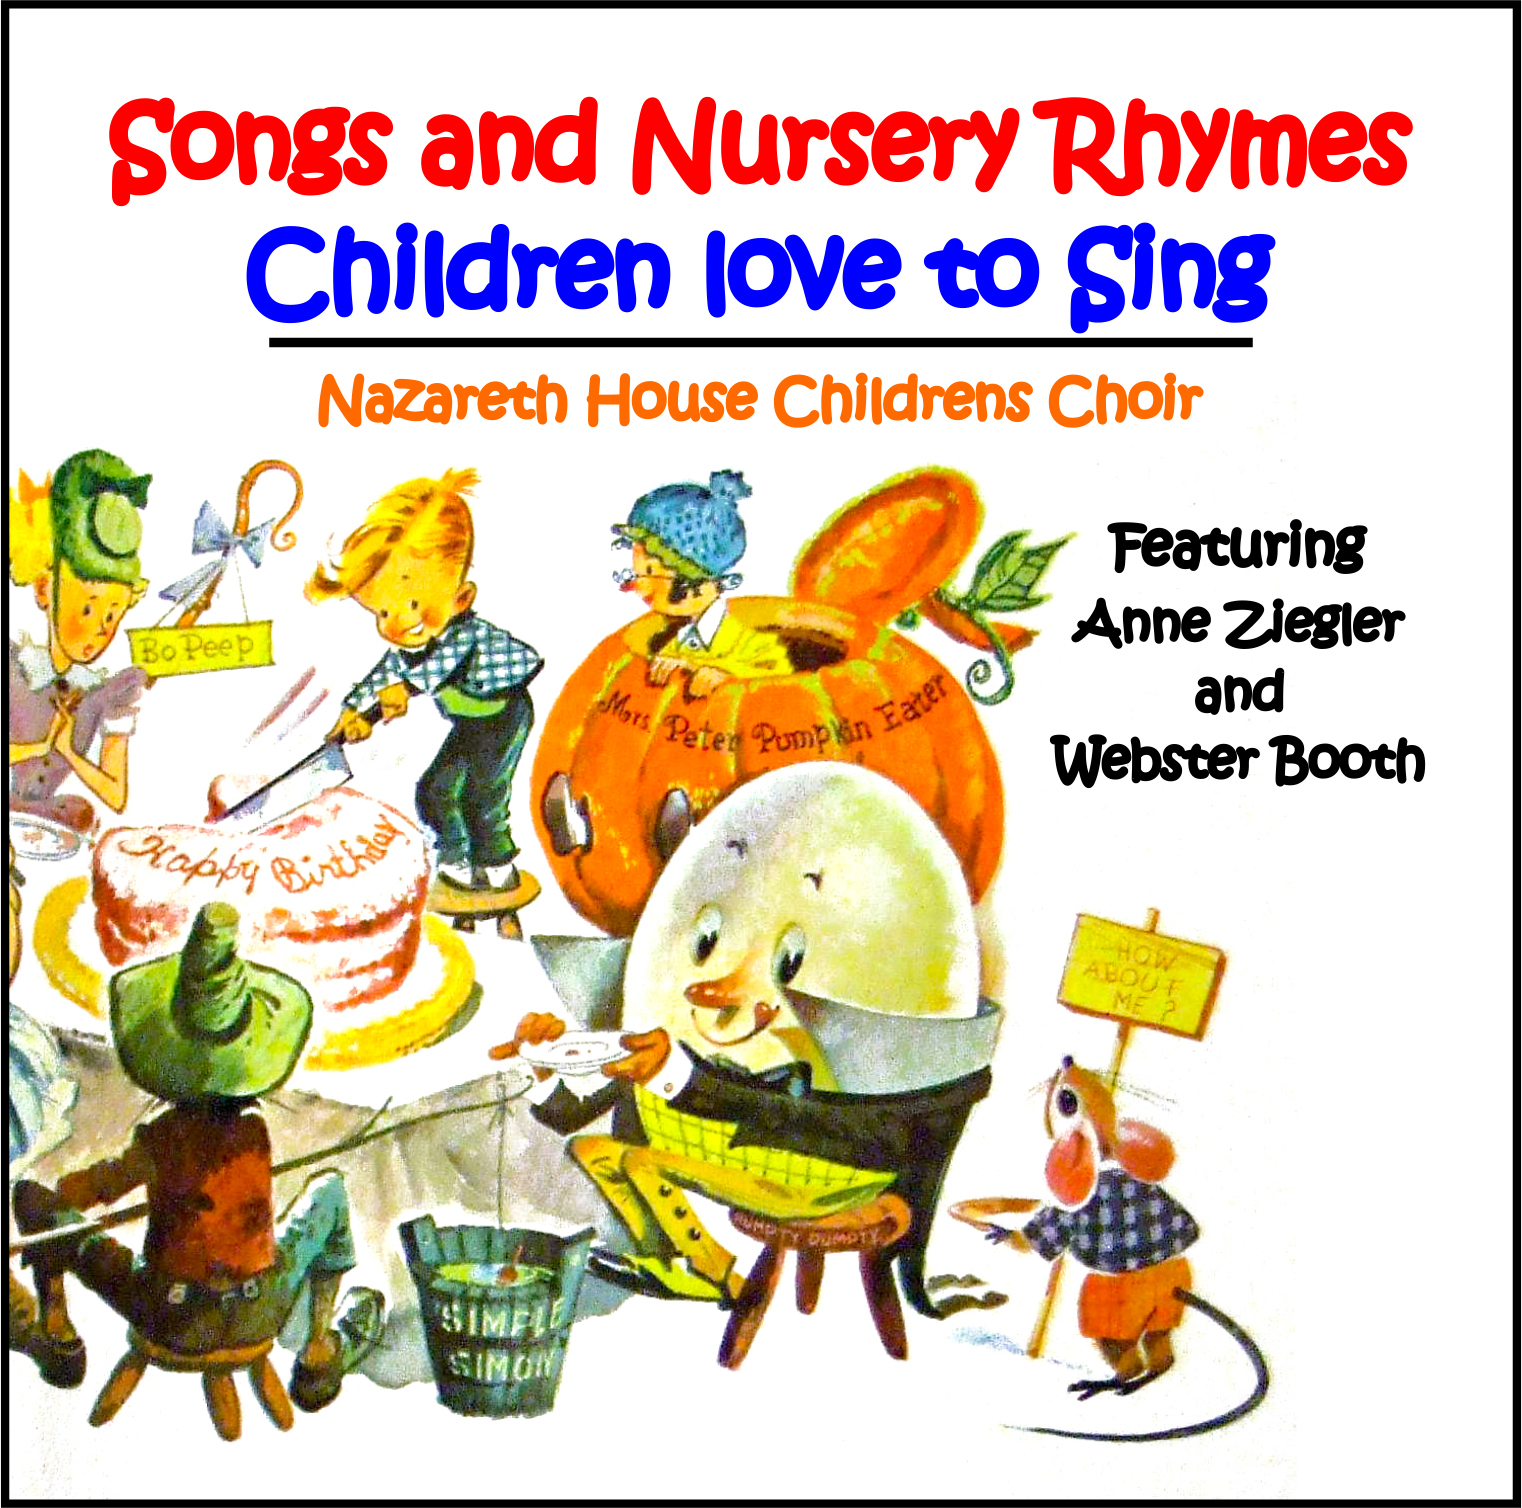 Dutch Wooden Shoes/I Had a Little Engine/Our Percussion Band/Nursery School Singalong